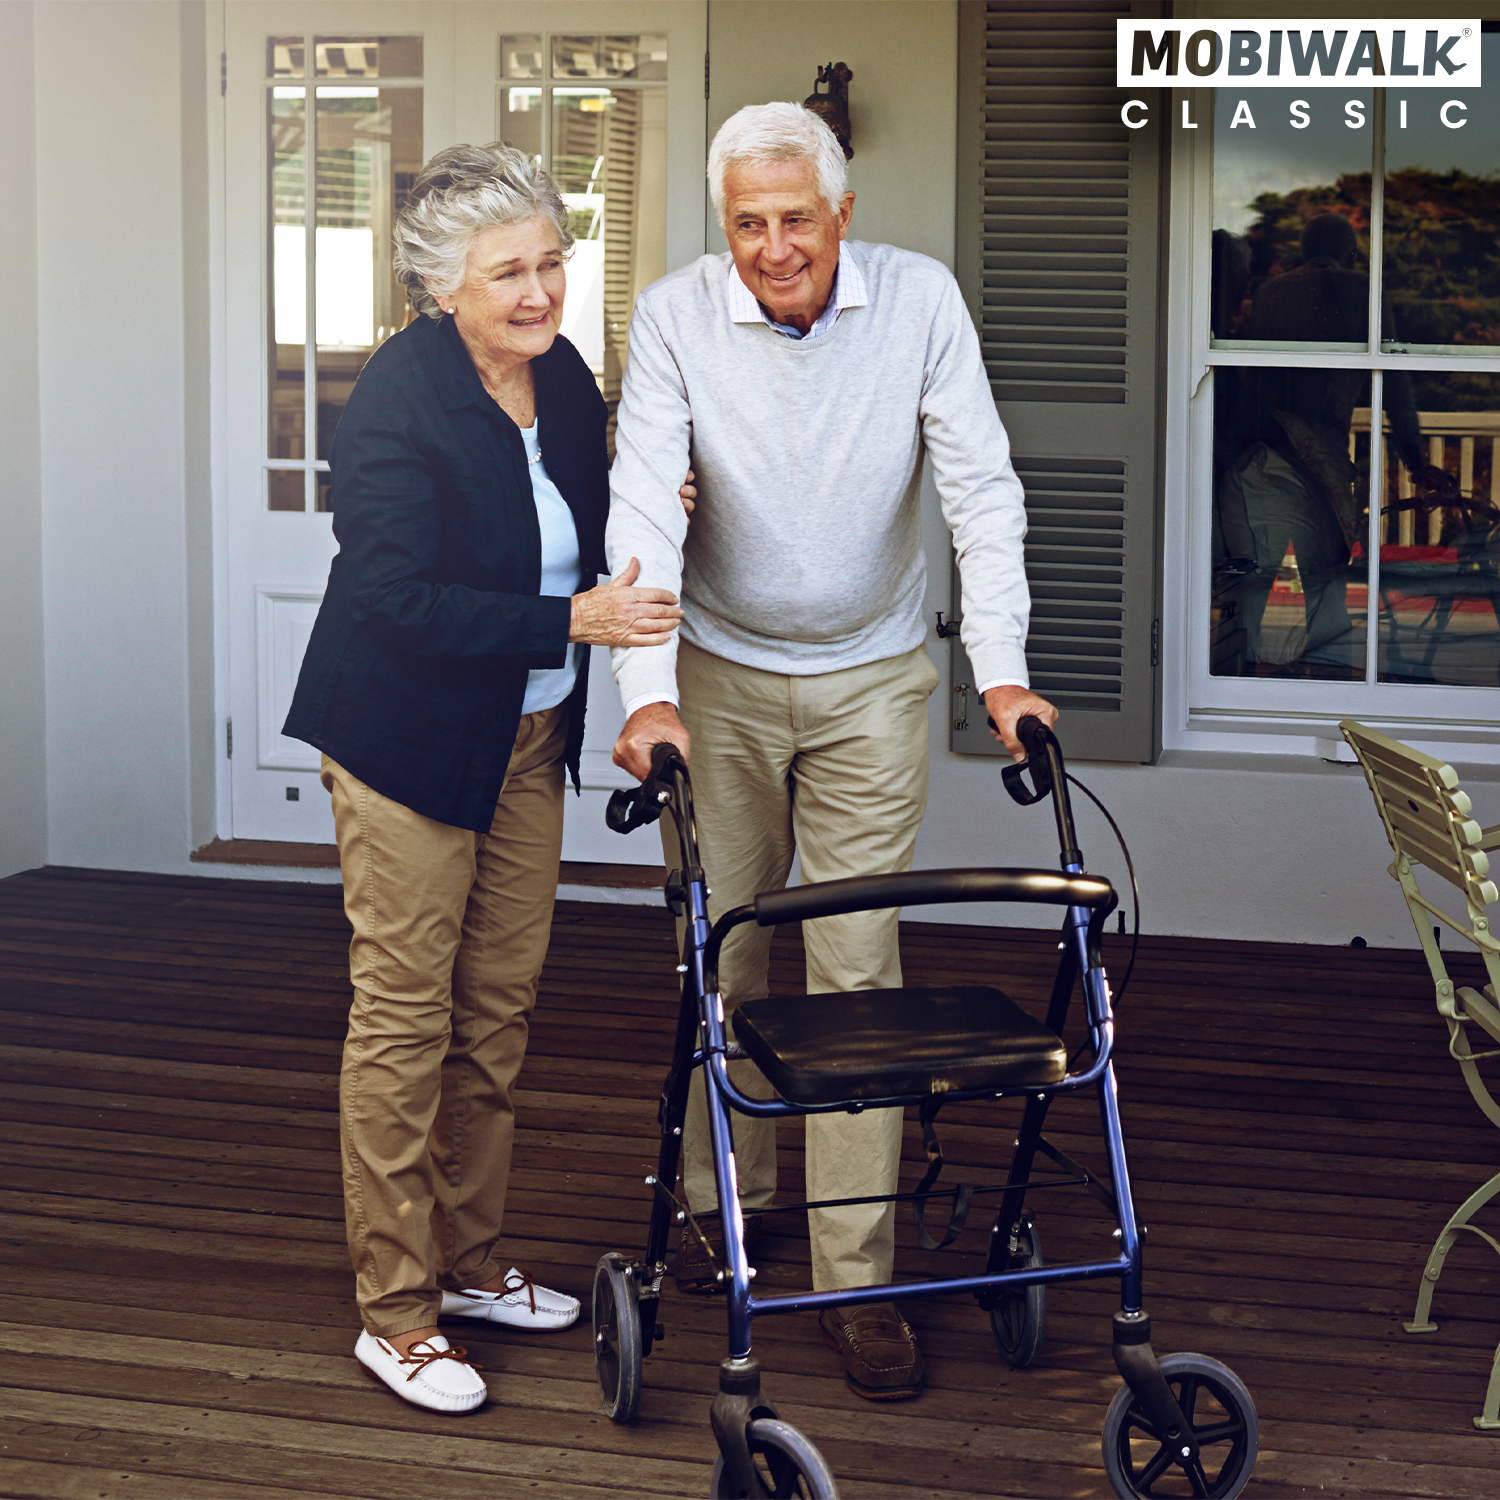 MobiWalk® CLASSIC 4 WHEELED ROLLATOR With Seat | Lightweight Four-Wheeled Mobility Walker